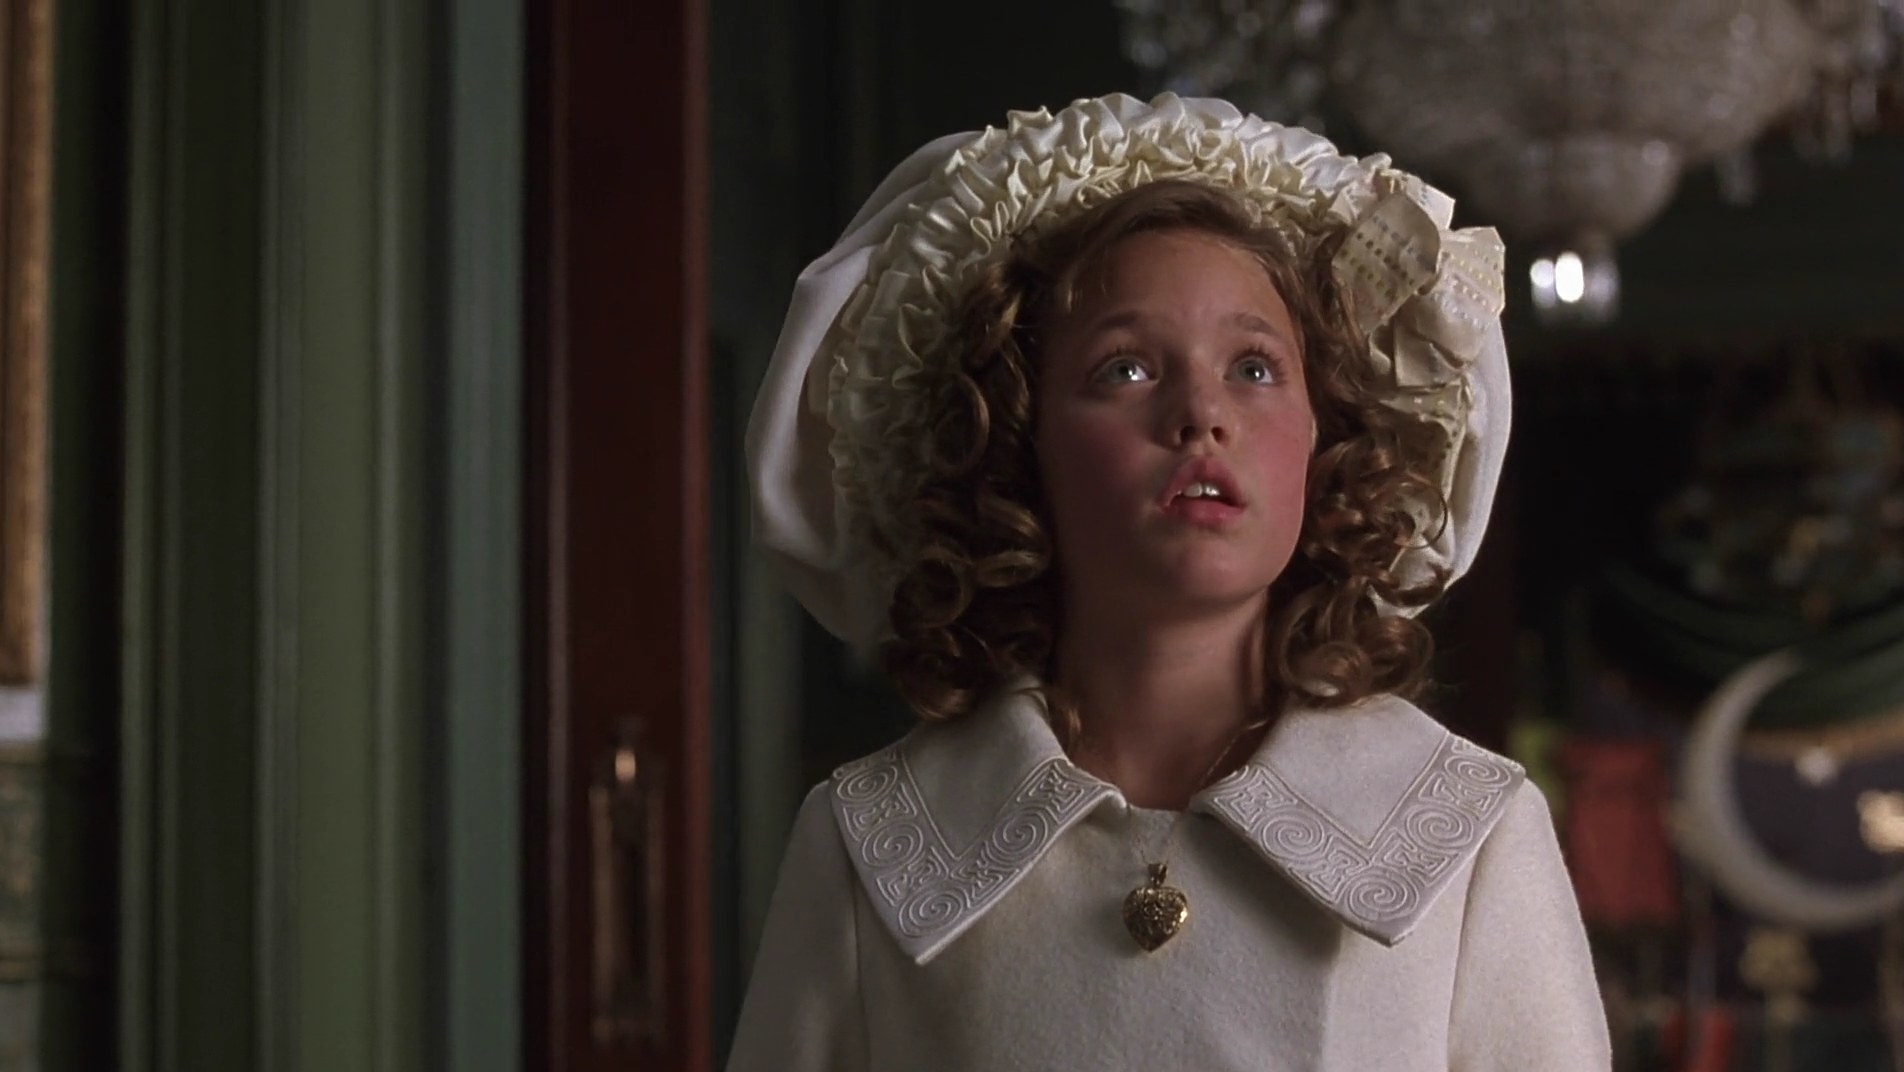 Sara wears an elaborate white hat, a white coat, and a gold locket, and stares upwards at something